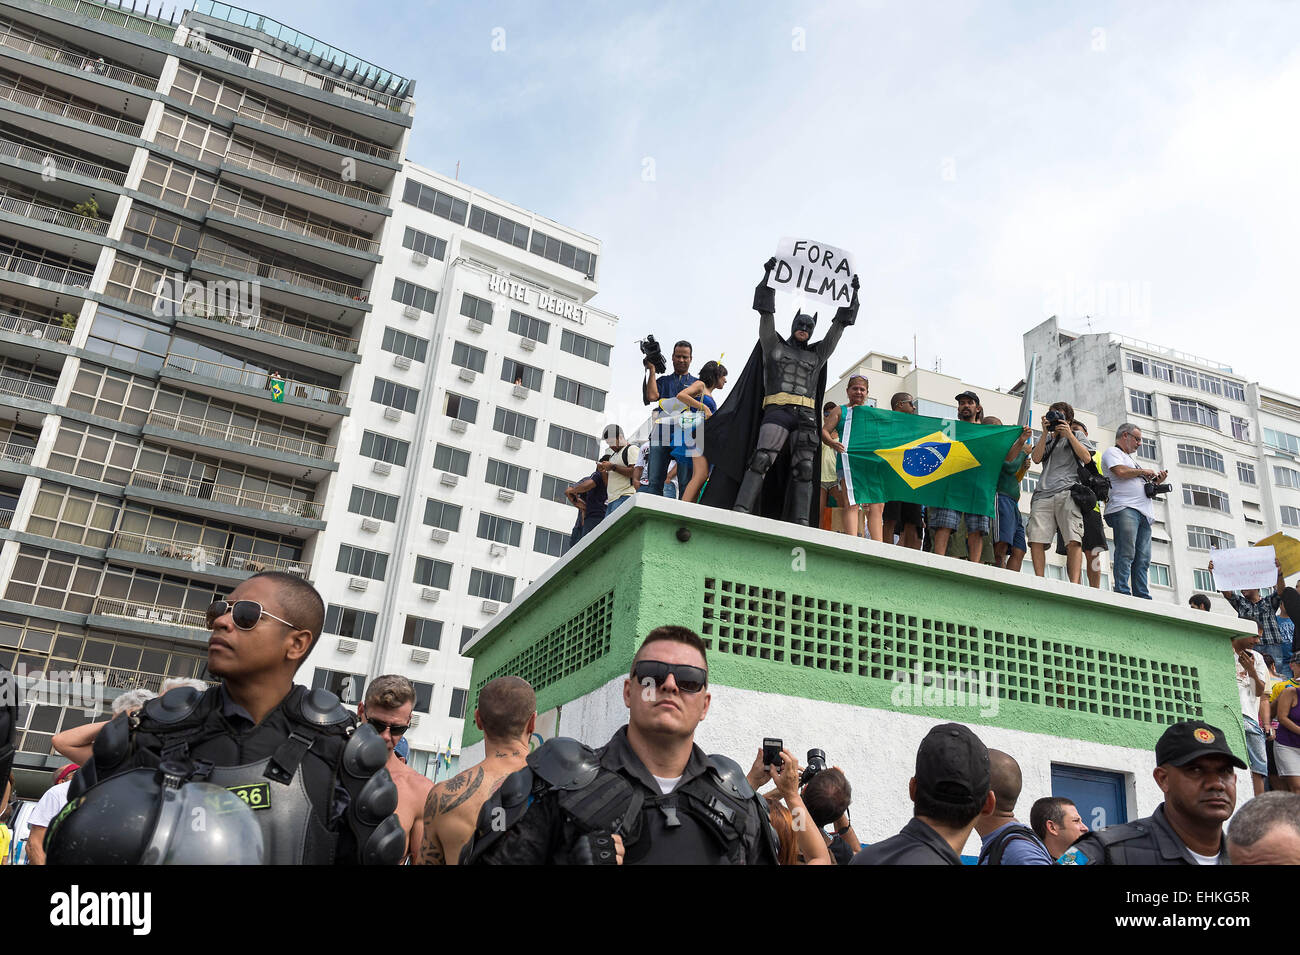 Rio De Janeiro, RJ, Brazil. 16th Mar, 2015. Eron Melo, famous and know as ''Batman'', who is going since 2013 to the streets to protest against corruption and bad government, is back on the streets today. Eron and his fellows are protesting on a roof of a building in Copacabana with posters and flags, ''DILAM OUT''.On Sunday, March 15th, a big crowd is gathering at Copacabana beach, south side of Rio City, Brazil. People from everywhere and all social classes, came to the streets to protest against Dilma Roussef, and are demanding her impeachment. They claim for justice, dignity, securit Stock Photo